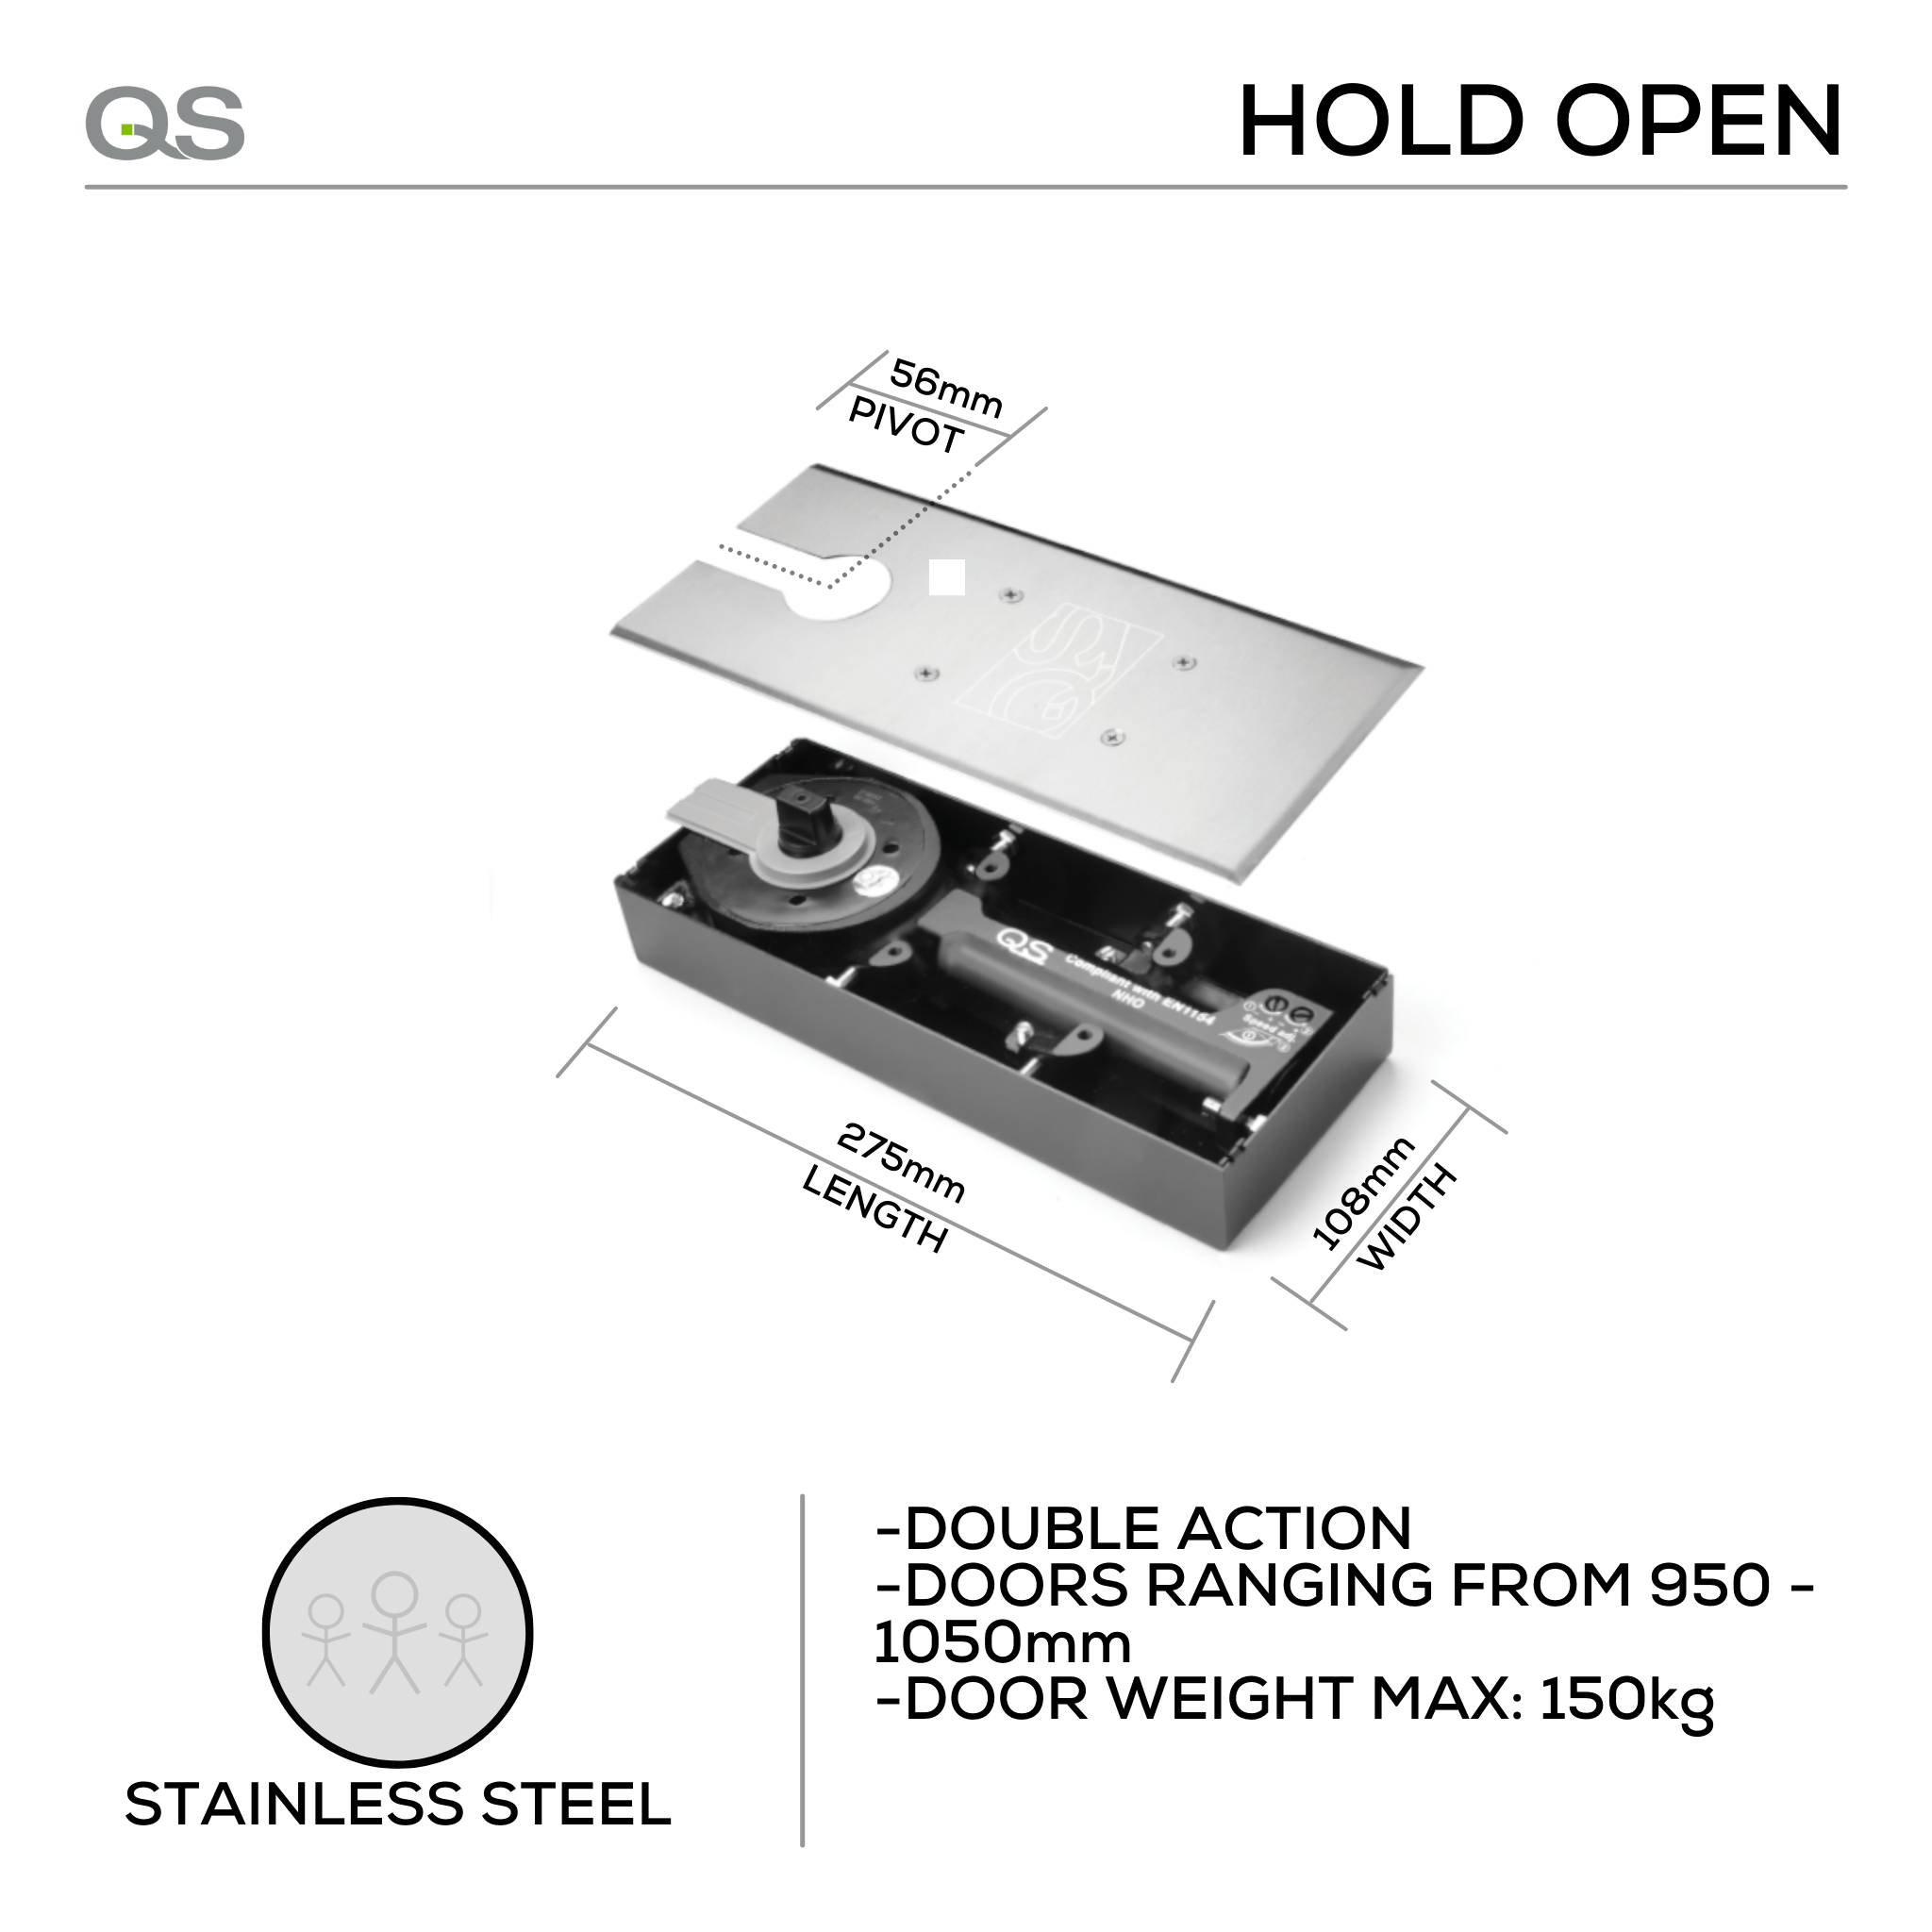 QS880/3 HO, Floorspring, Double Action, Hold Open, 150mm (kg), 3, Top Centre, Bottom Strap, Stainless Steel, QS